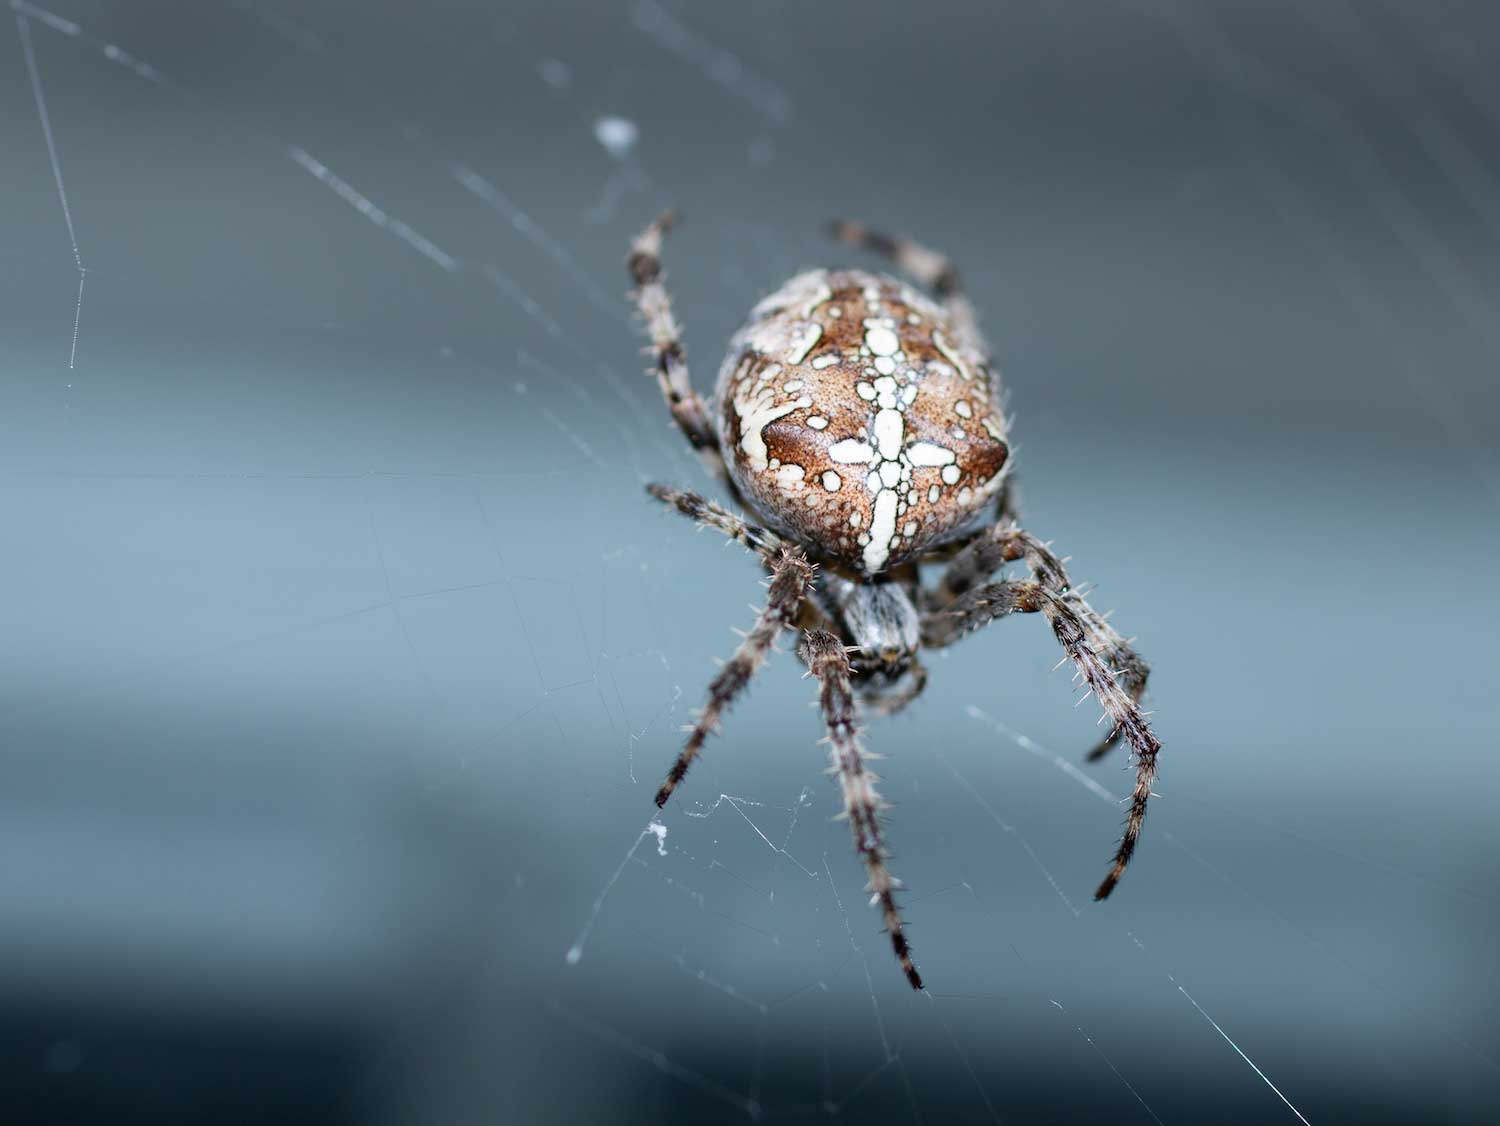 3 Interesting Facts About Spiders